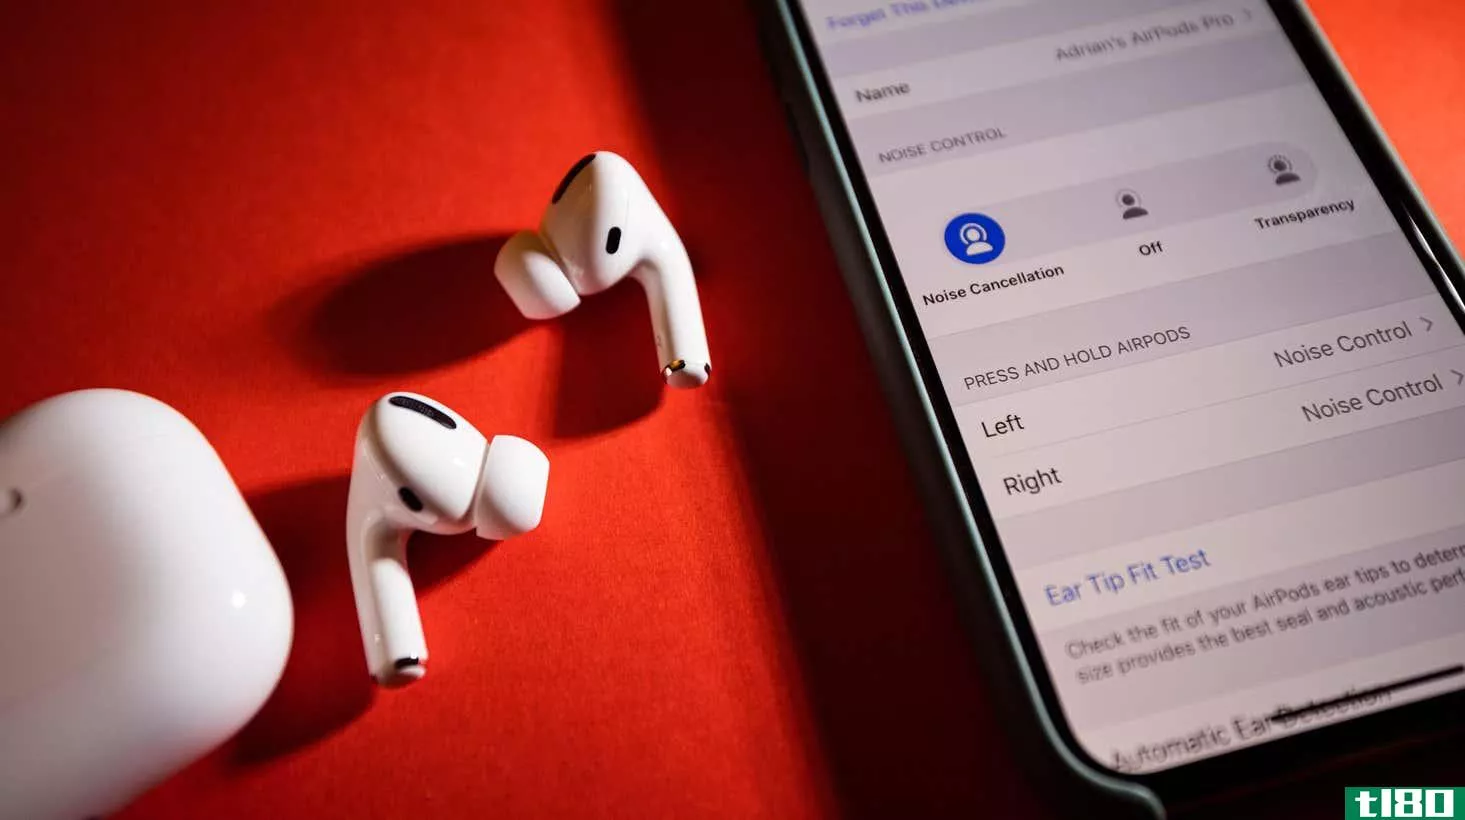 A decorative image of AirPods Pro on a table next to an iPhone displaying the bluetooth settings